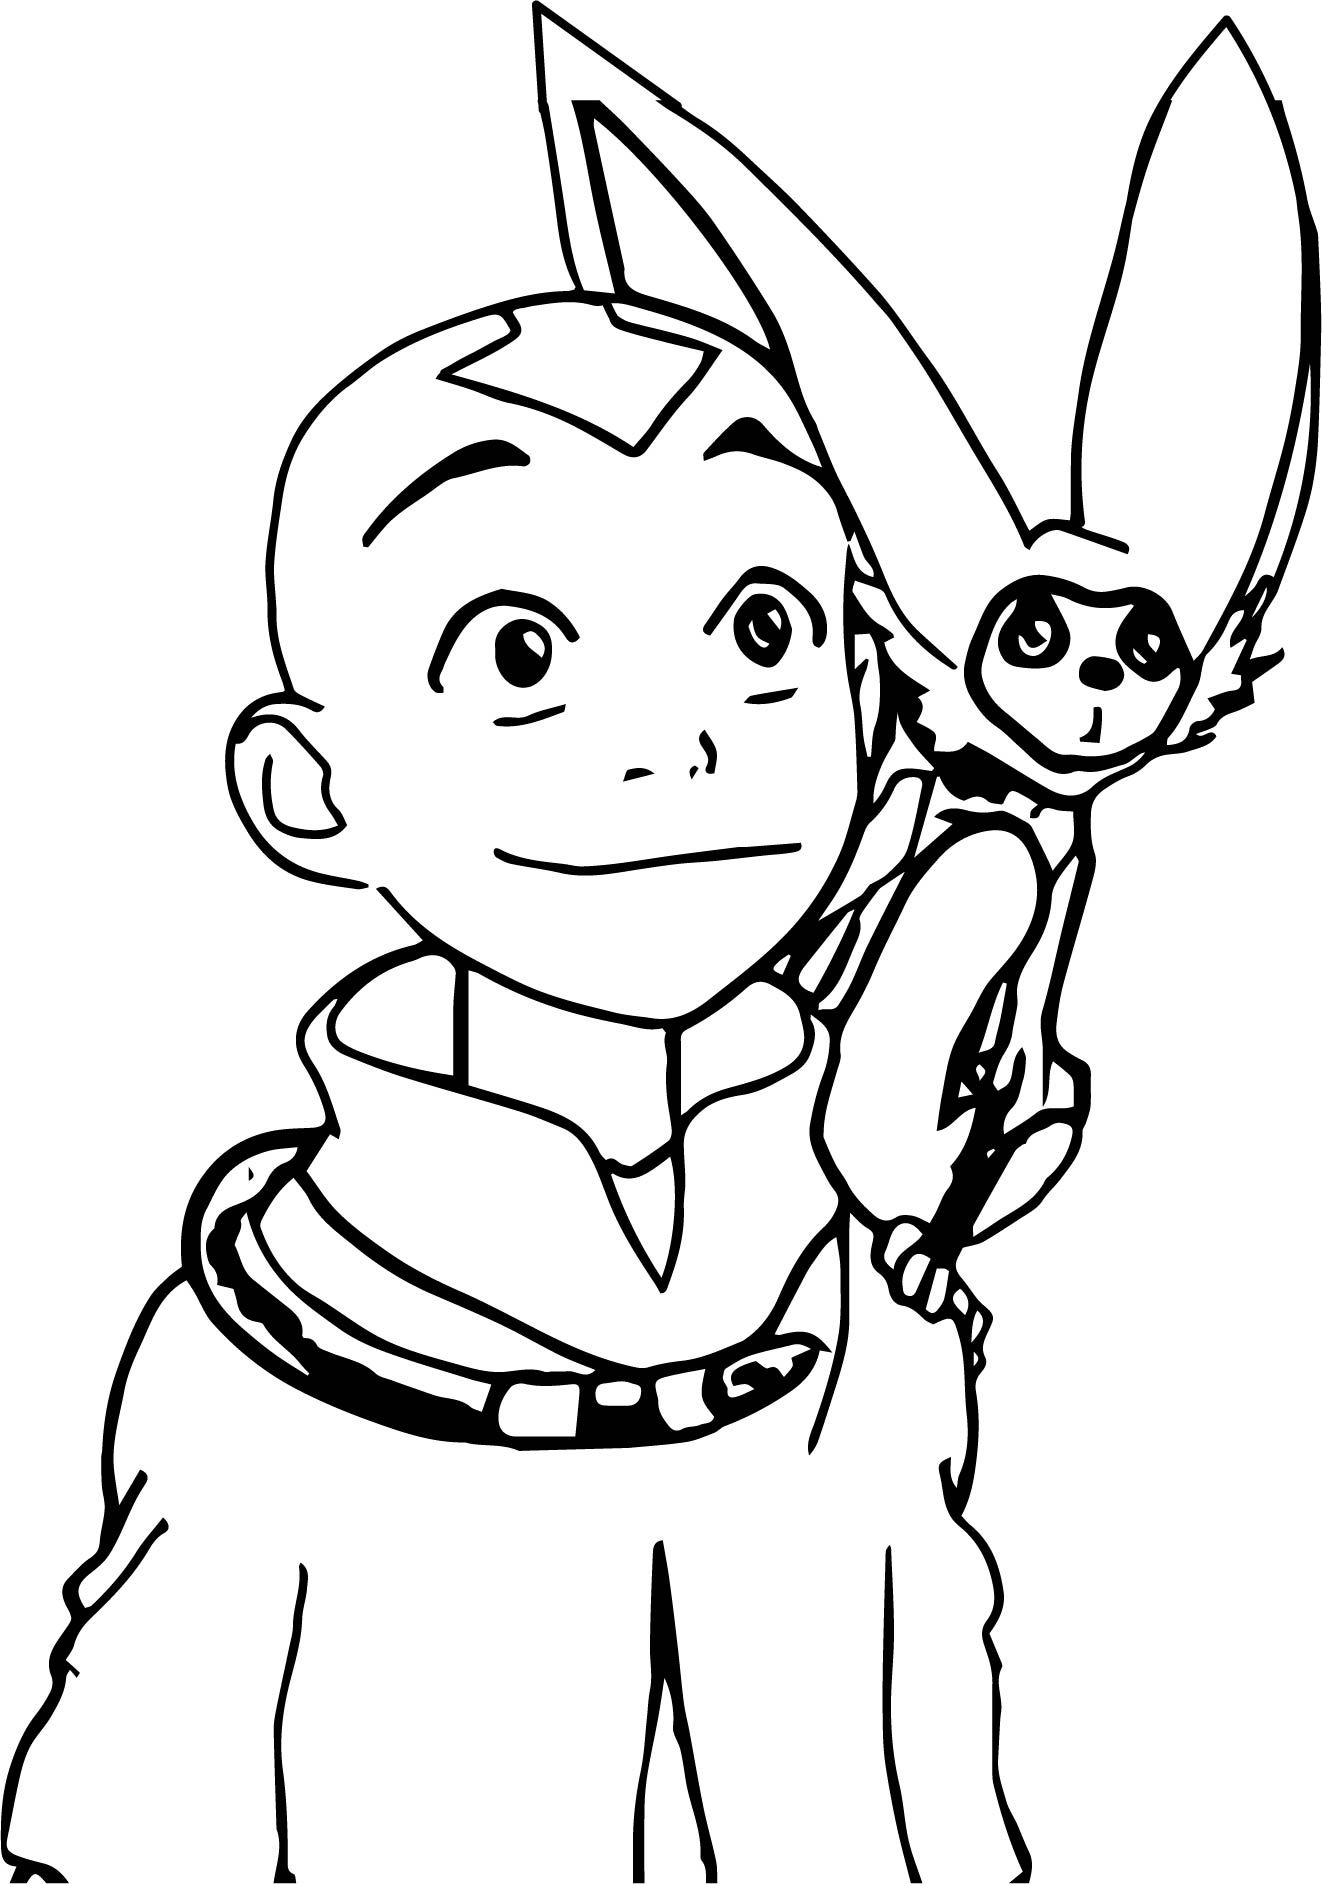 Avatar The Last Airbender Coloring Pages Free Pdf - Aang Avatar The Last Airbender Coloring Pages